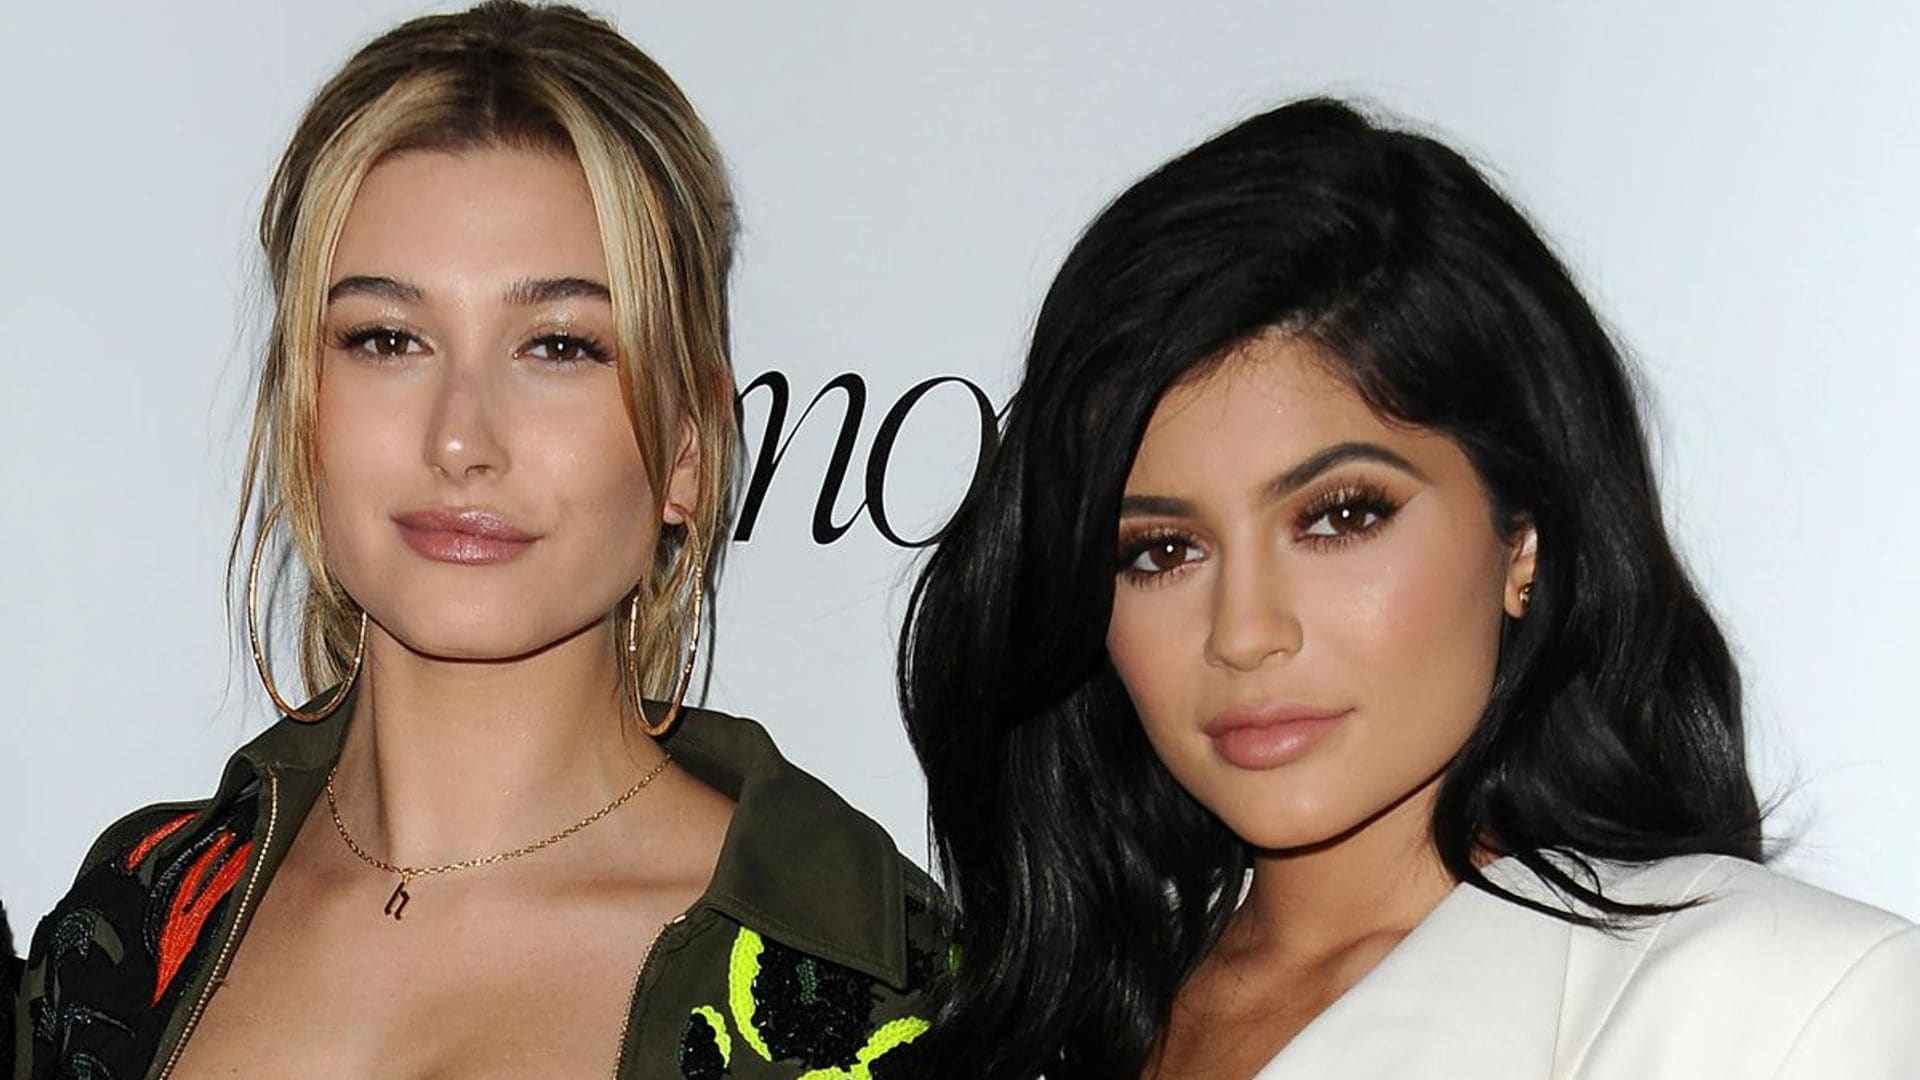 Kylie Jenner shares throwback with Hailey Bieber: ‘We’re moms now’